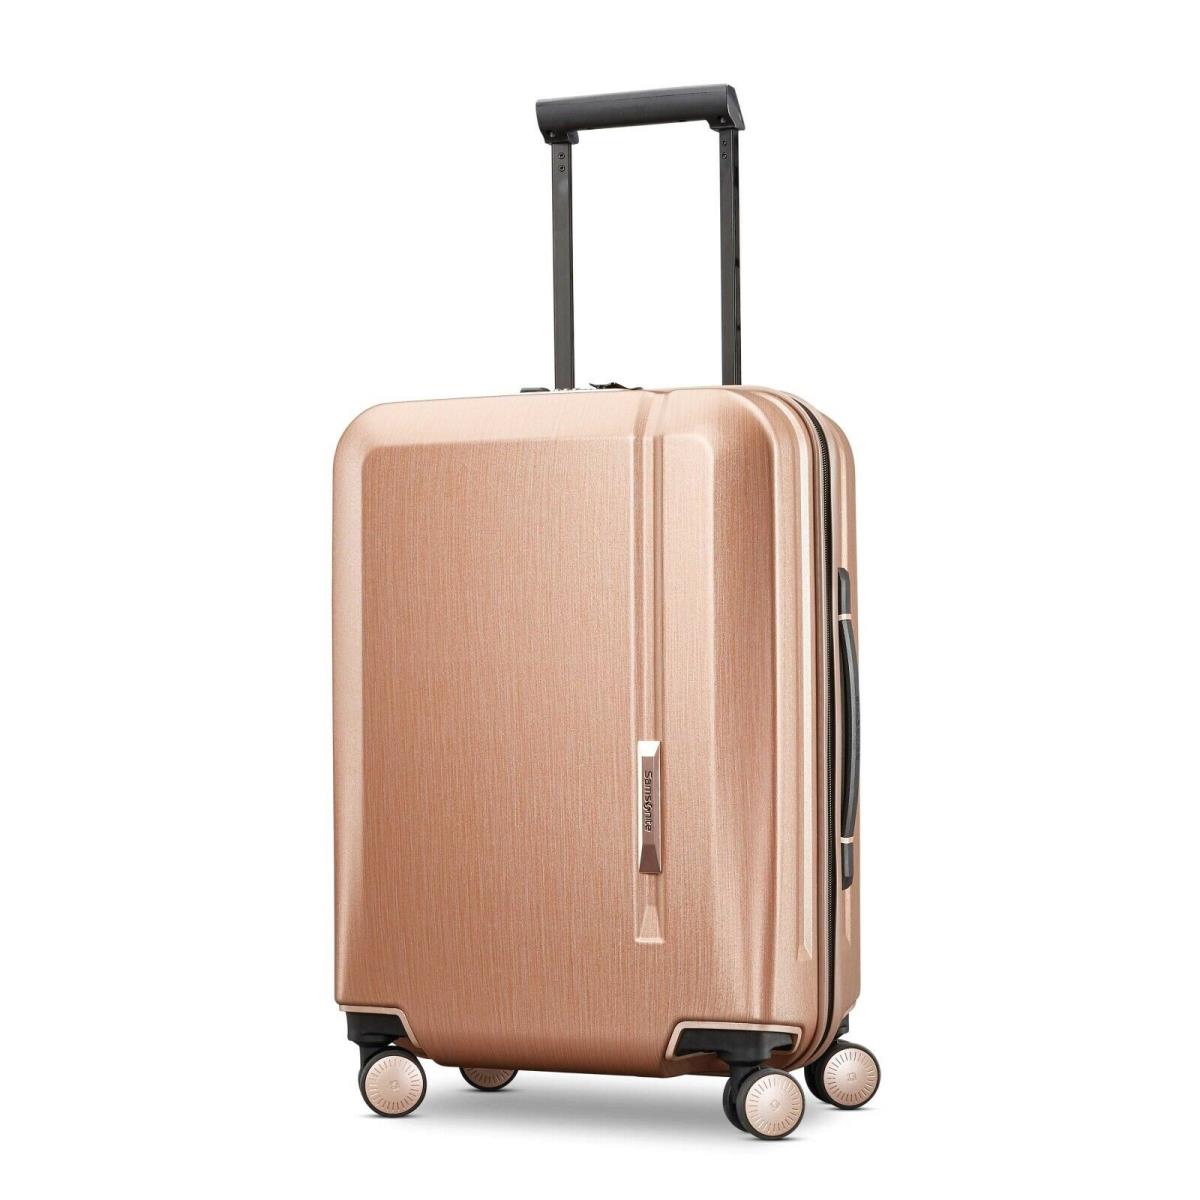 Samsonite Novaire 20 Carry-on 360 Spinner Trolley Wheel Luggage Travel Suitcase Rose Gold